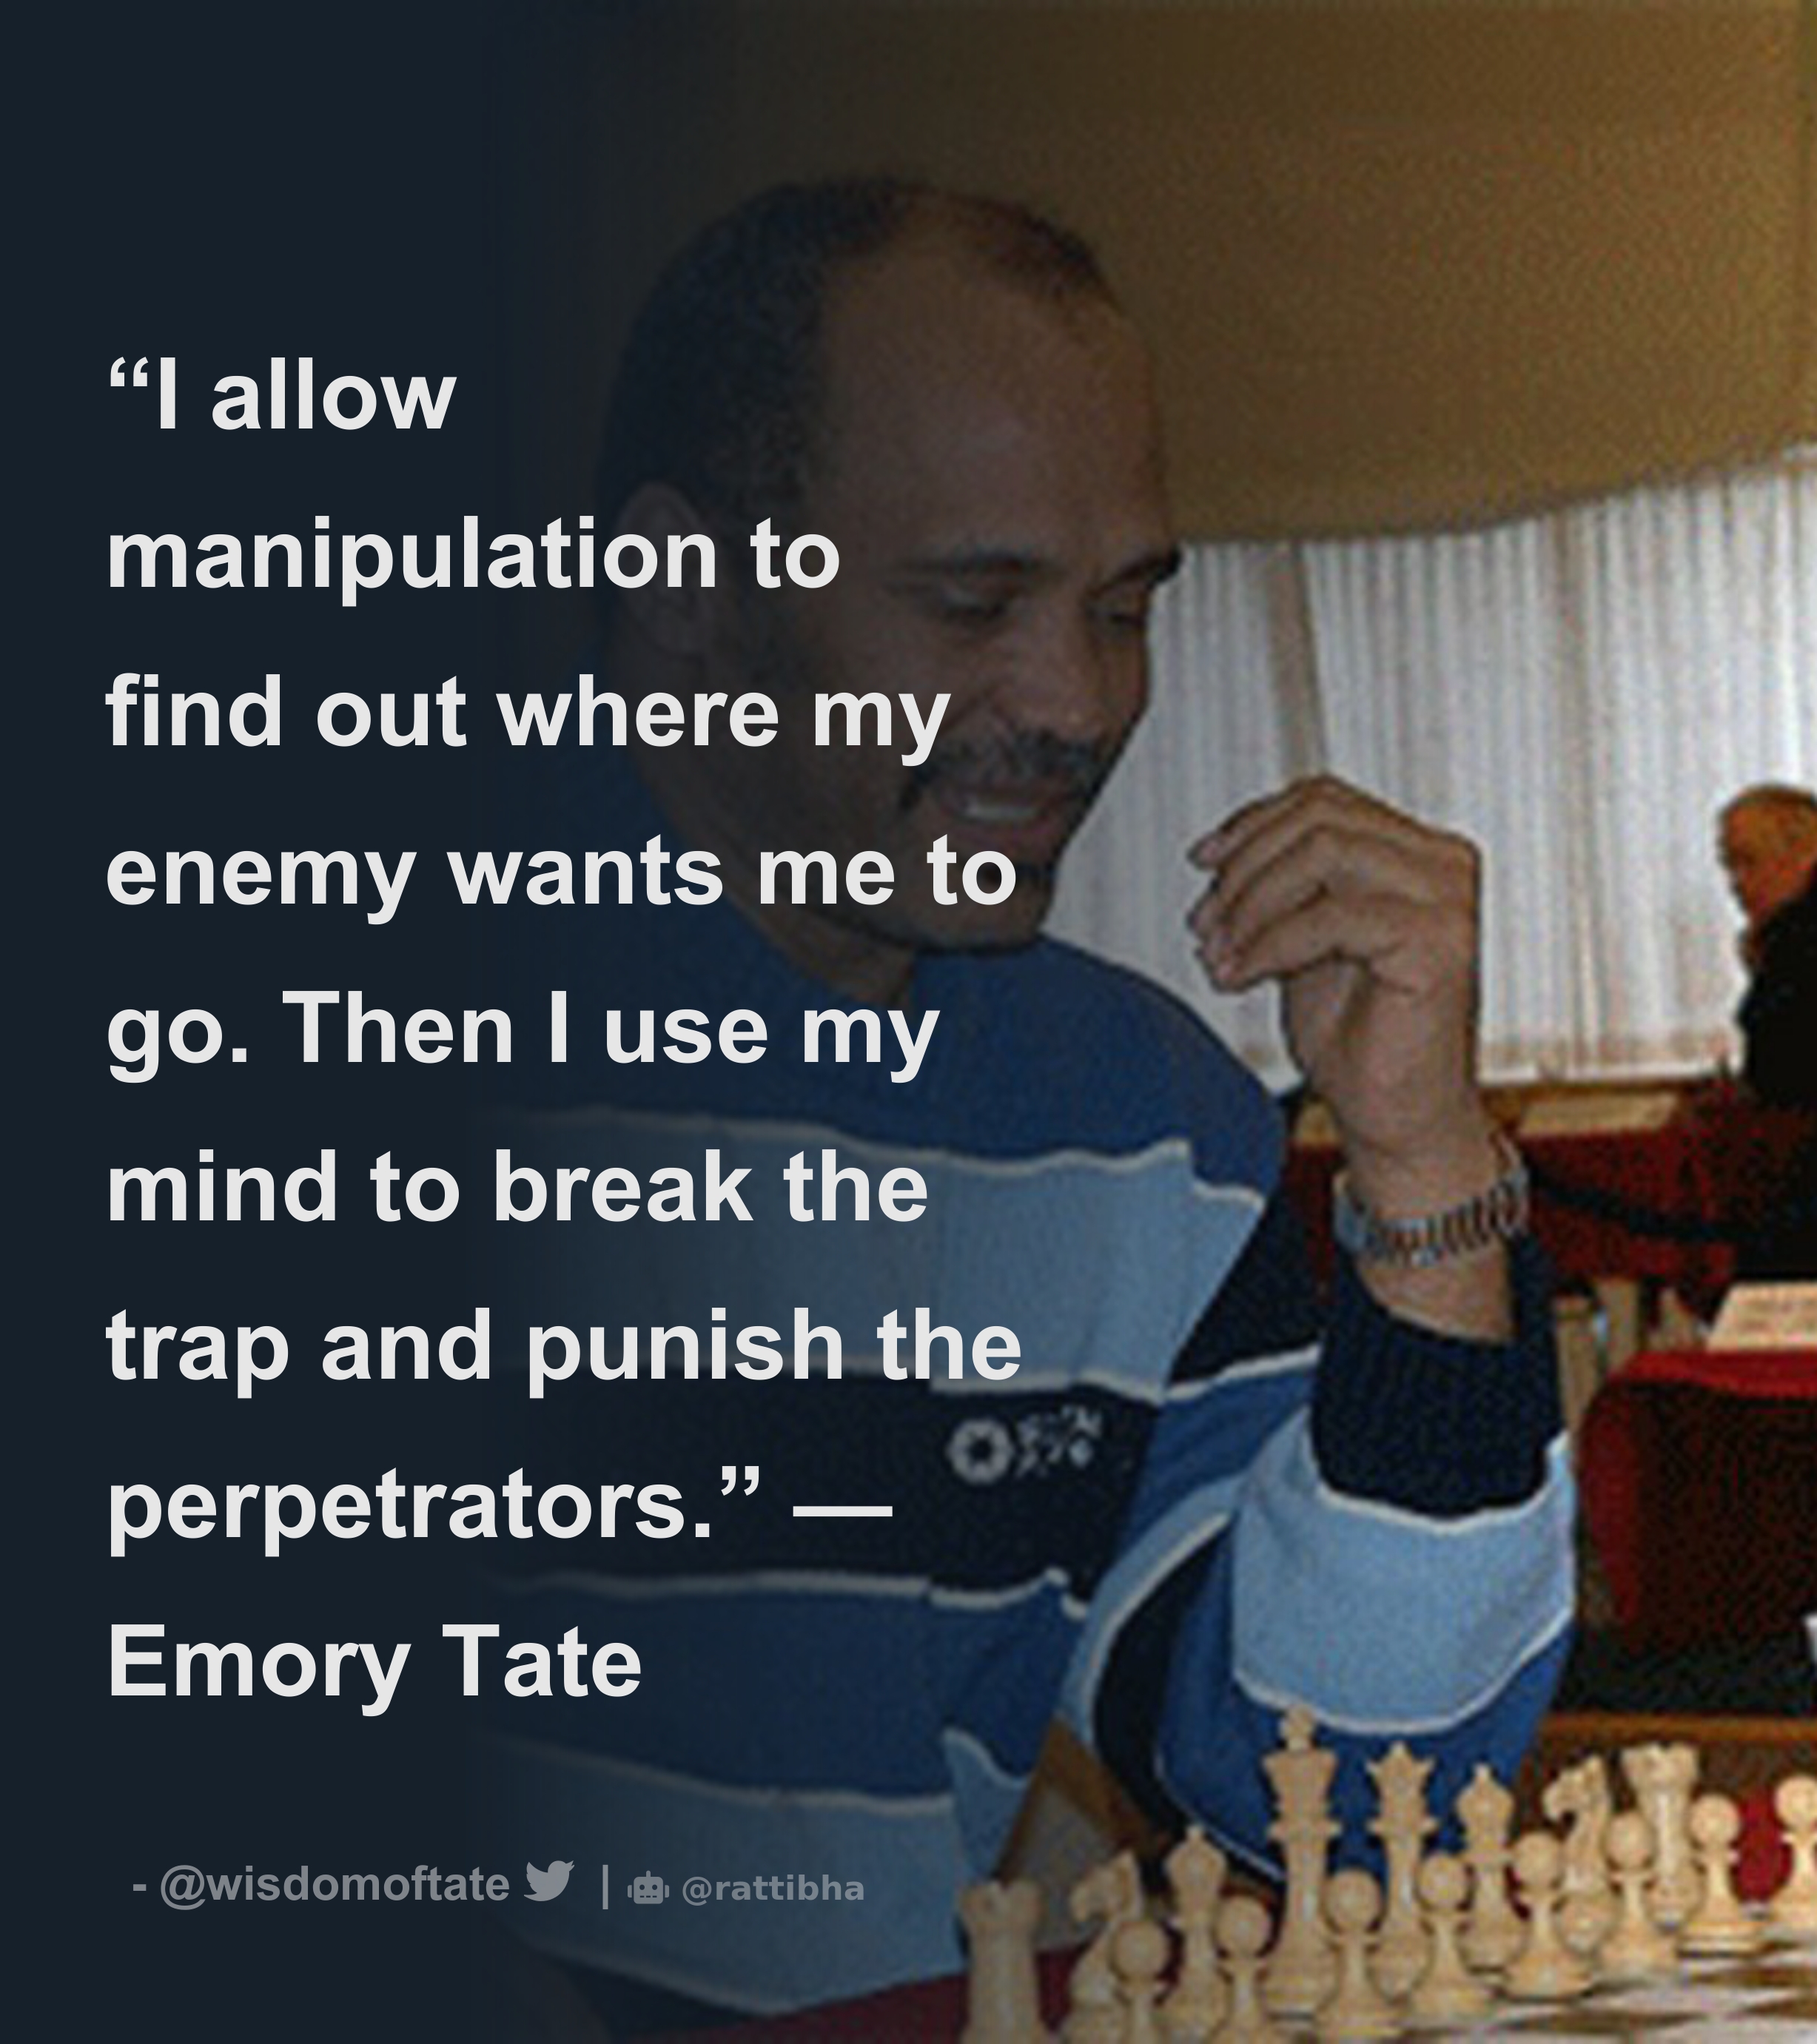 emory tate on X: I allow manipulation to find out where my enemy wants me  to go. Then I use my mind to break the trap and punish the perpetrators.  #alwayswin /